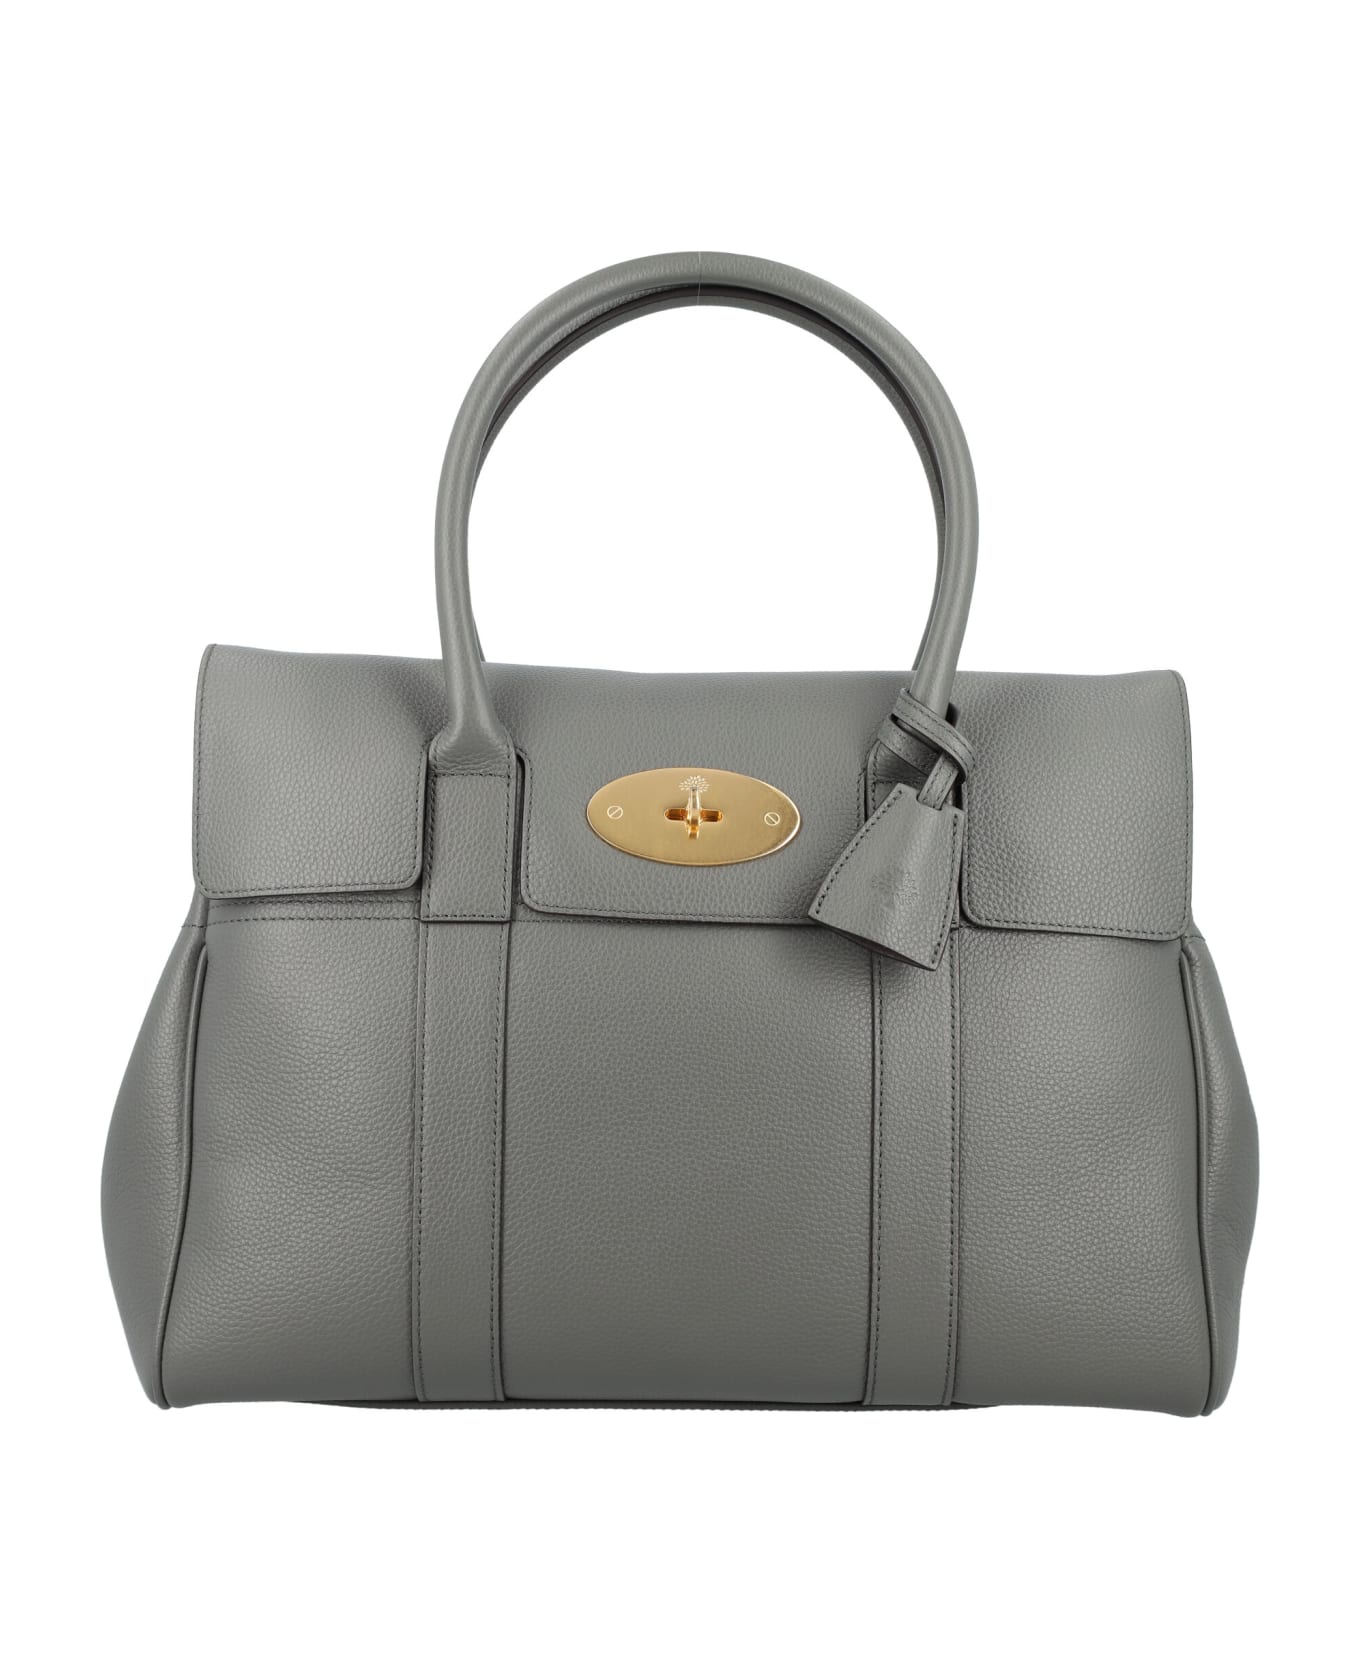 Mulberry Bayswater - CHARCOAL